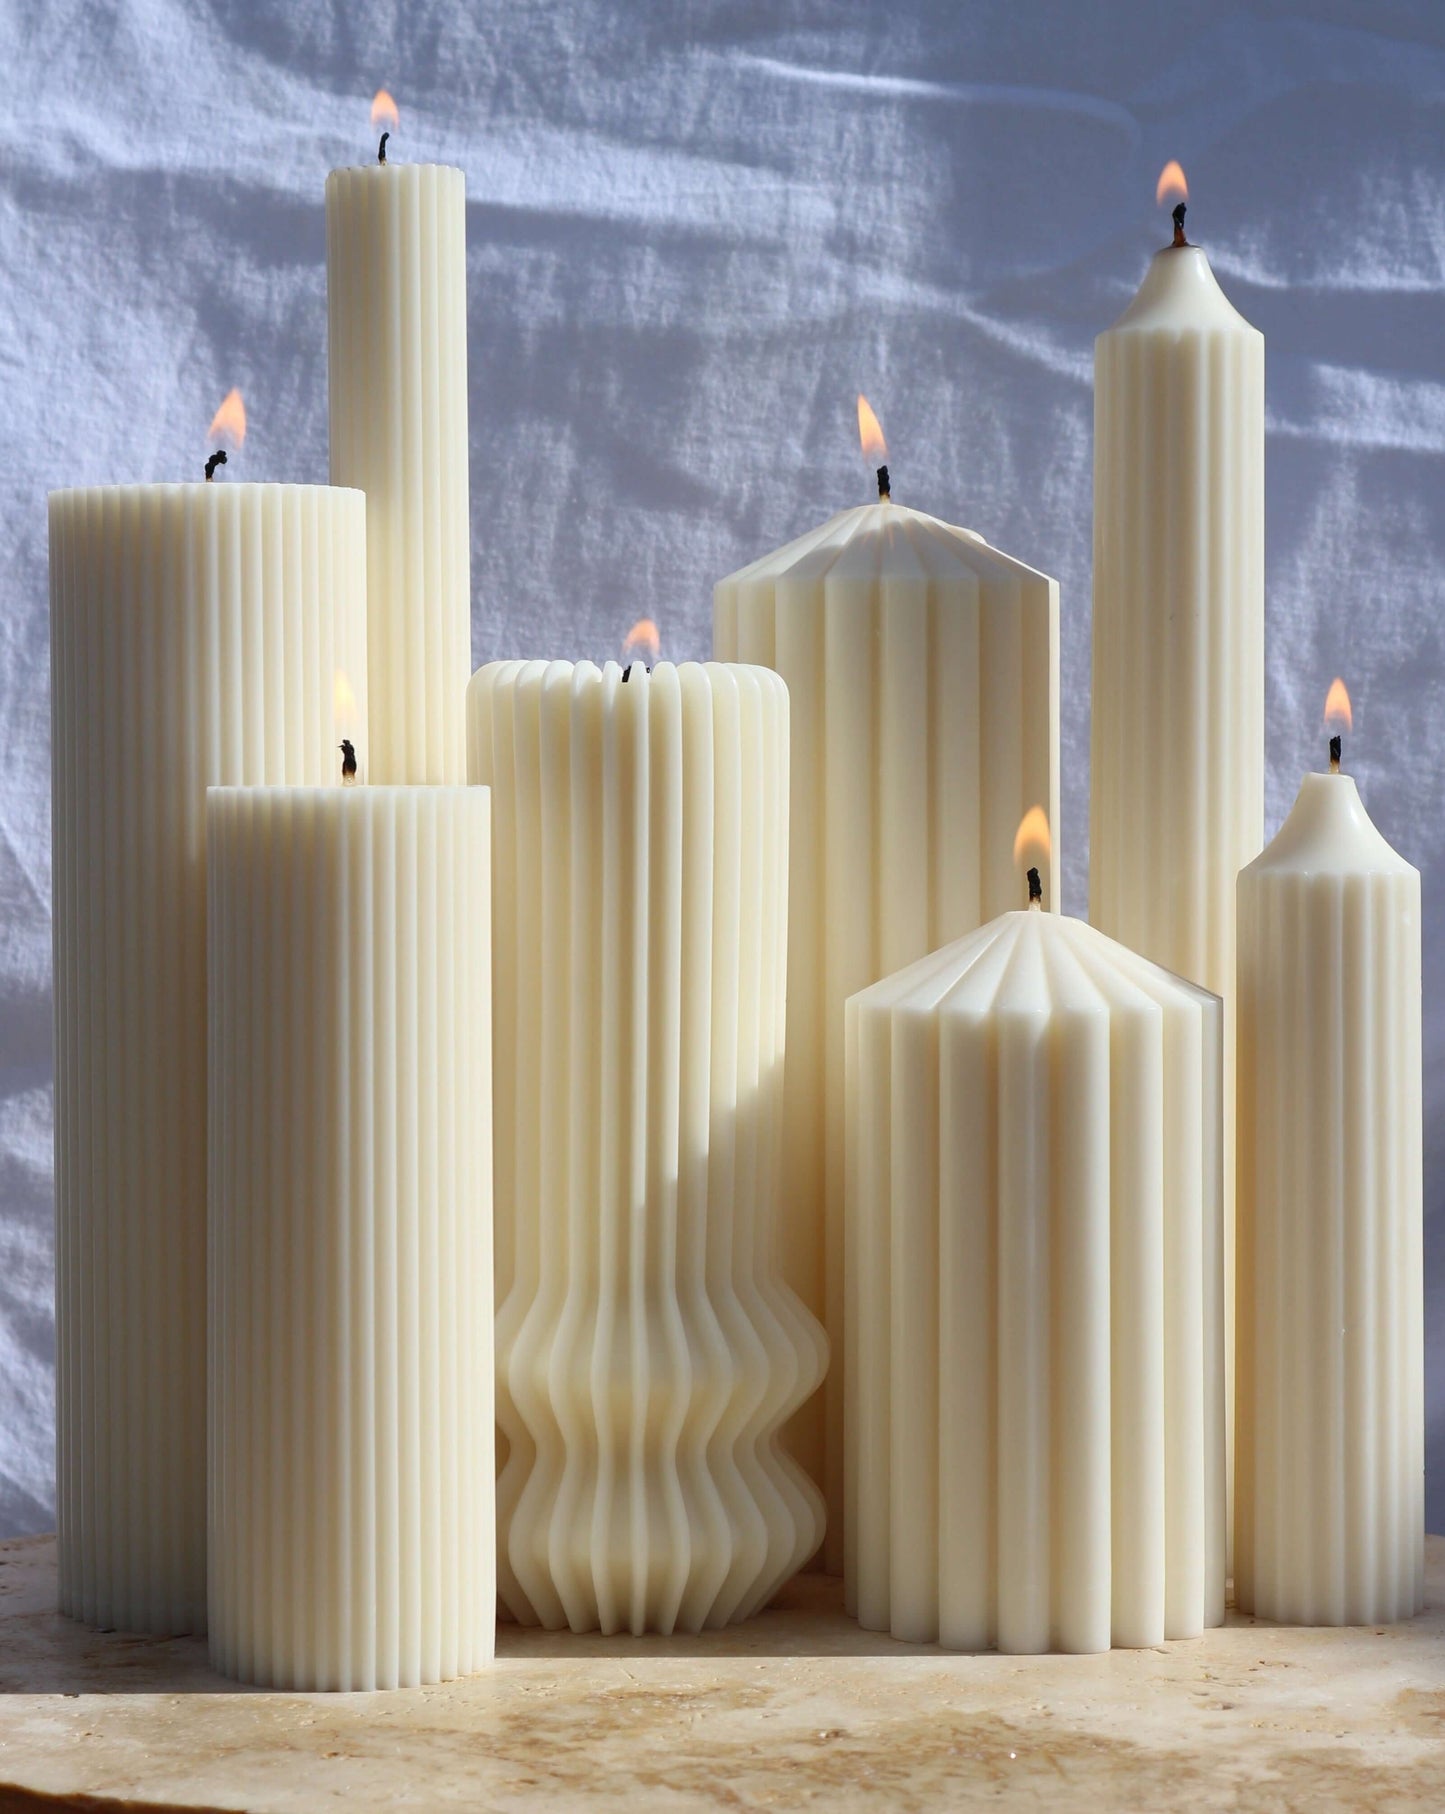 A Collection of Pillar Candles in an outdoor setting | Sculptural Candle Australia | Candle Decorations | Home Decorations | Bubble Candles | Free Standing Candles | Clean Candles | Sculptural Candles | Candles Australia | Scented Candles | Unscented Cand